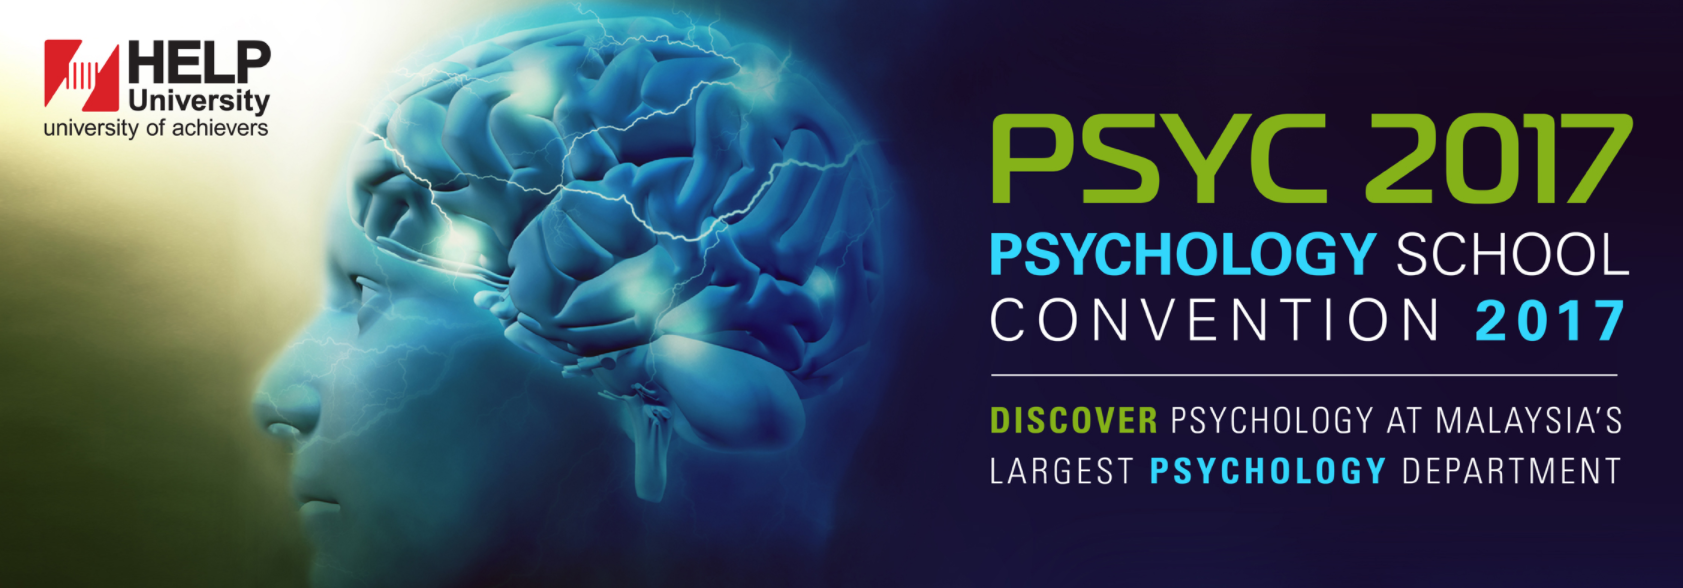 Gain Deep Insights Into the Mind at HELP University's Psychology School Convention 2017 - Feature-Image